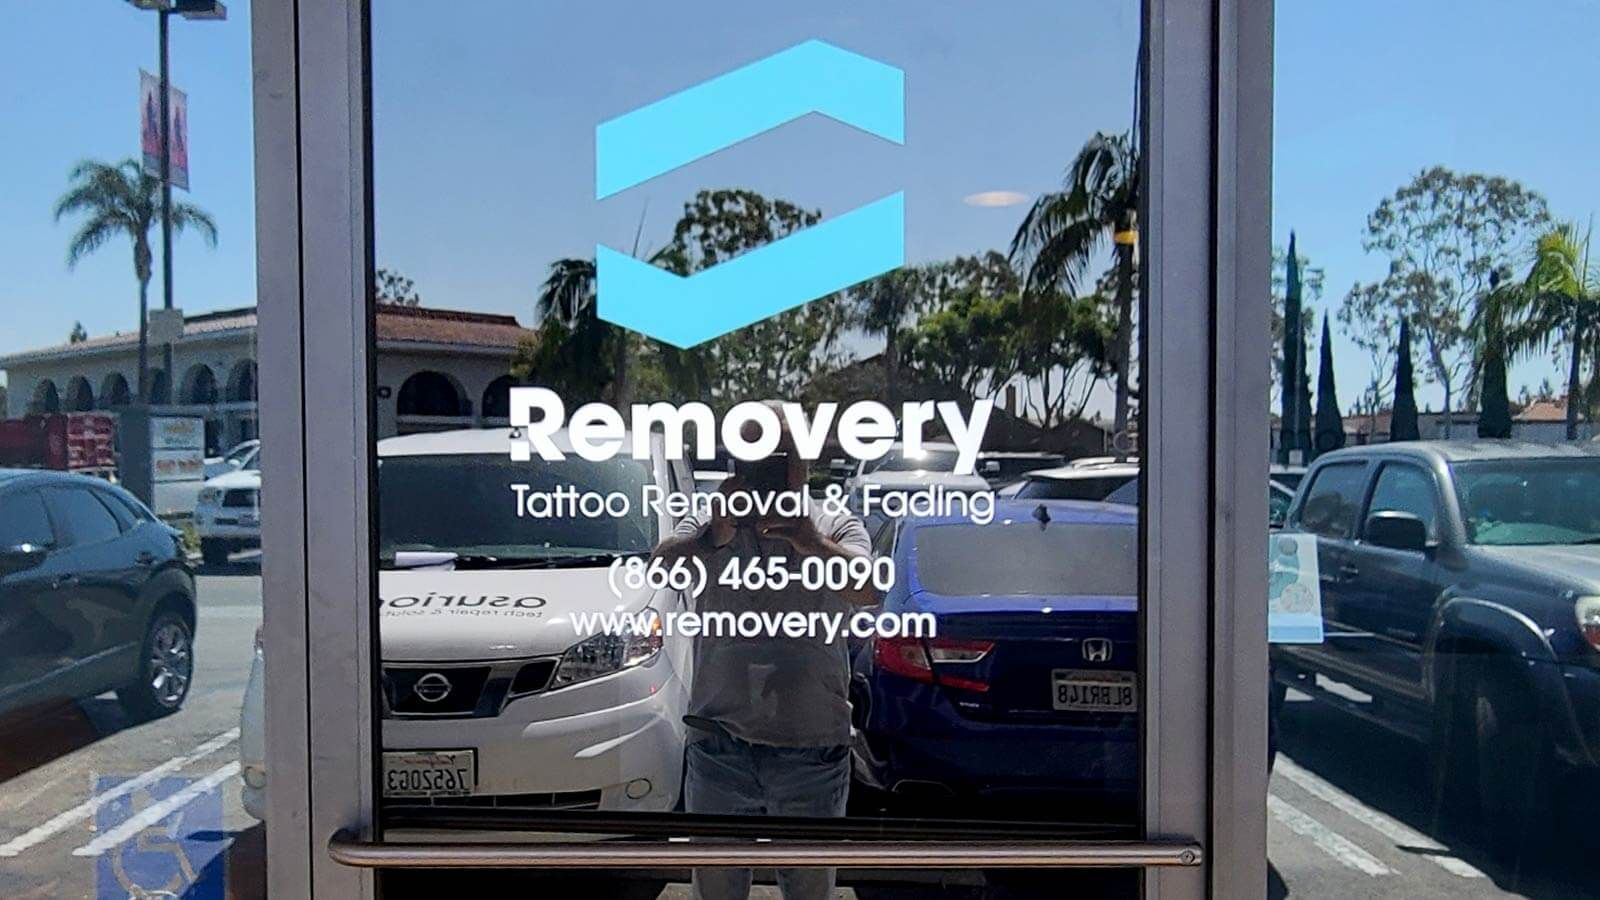 Removery Tattoo Removal & Fading window graphics for storefront decoration